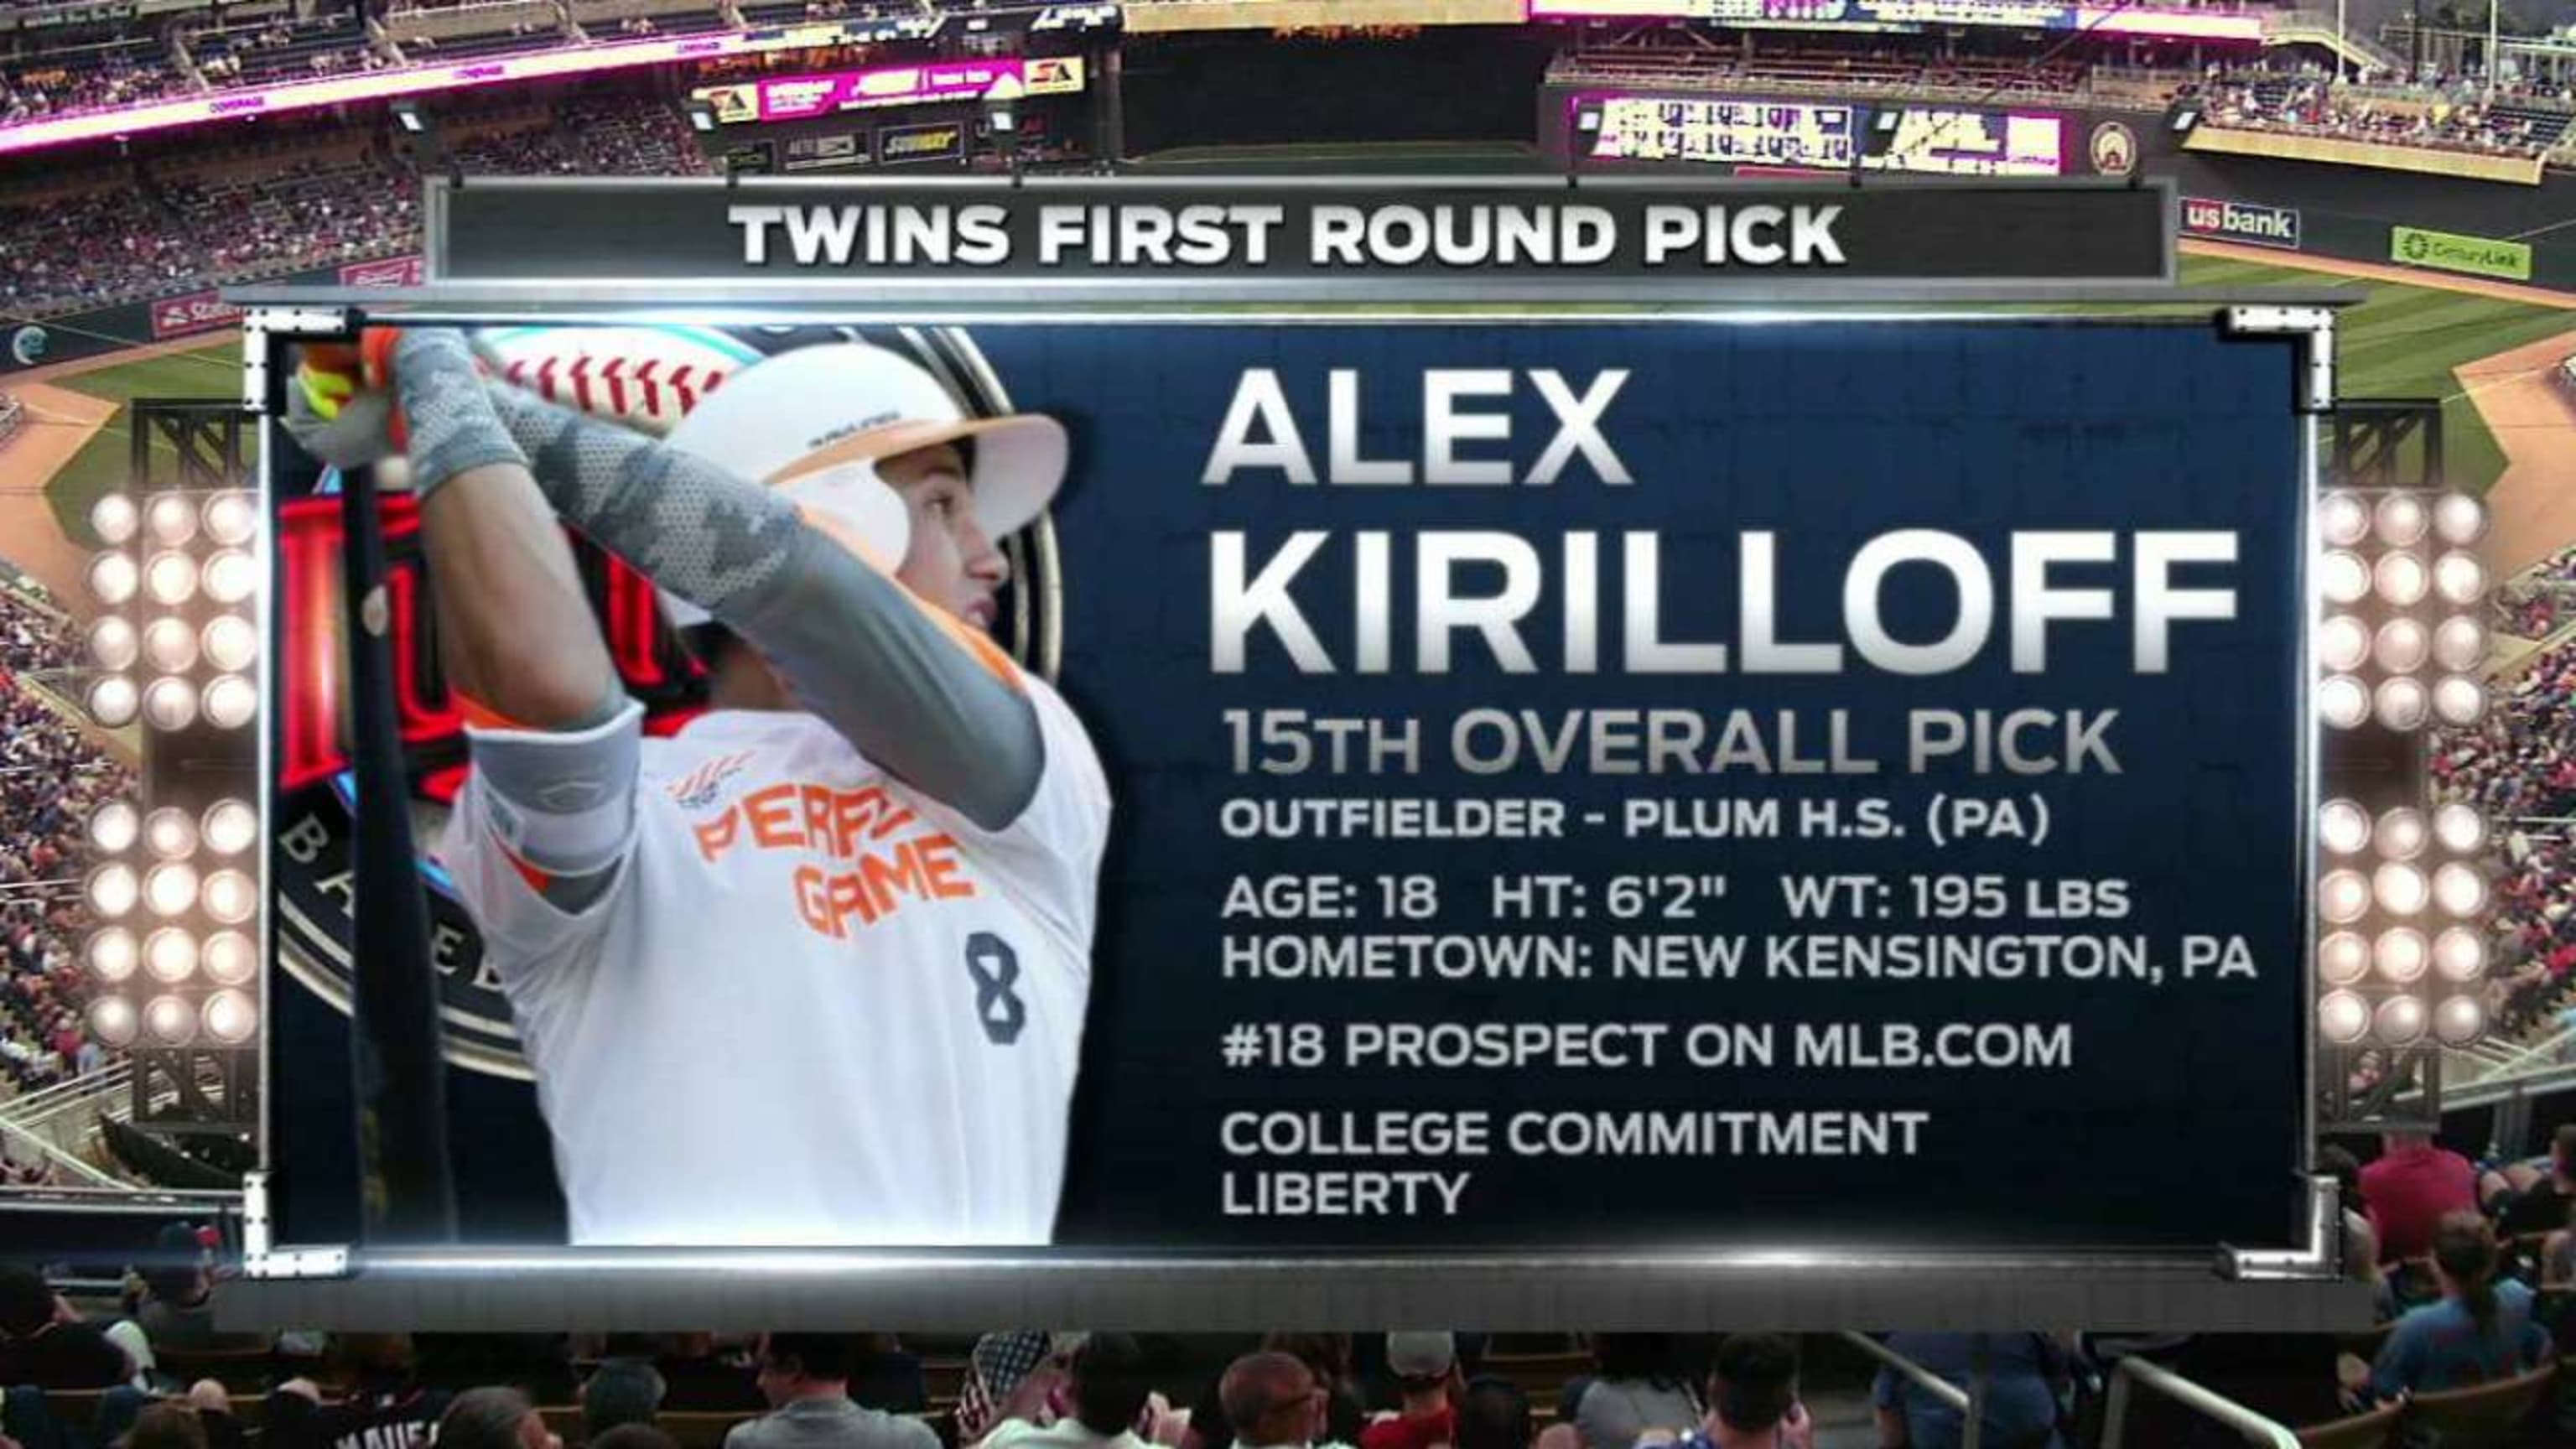 Alex Kirilloff is more than just “the other” 1st-round draft pick